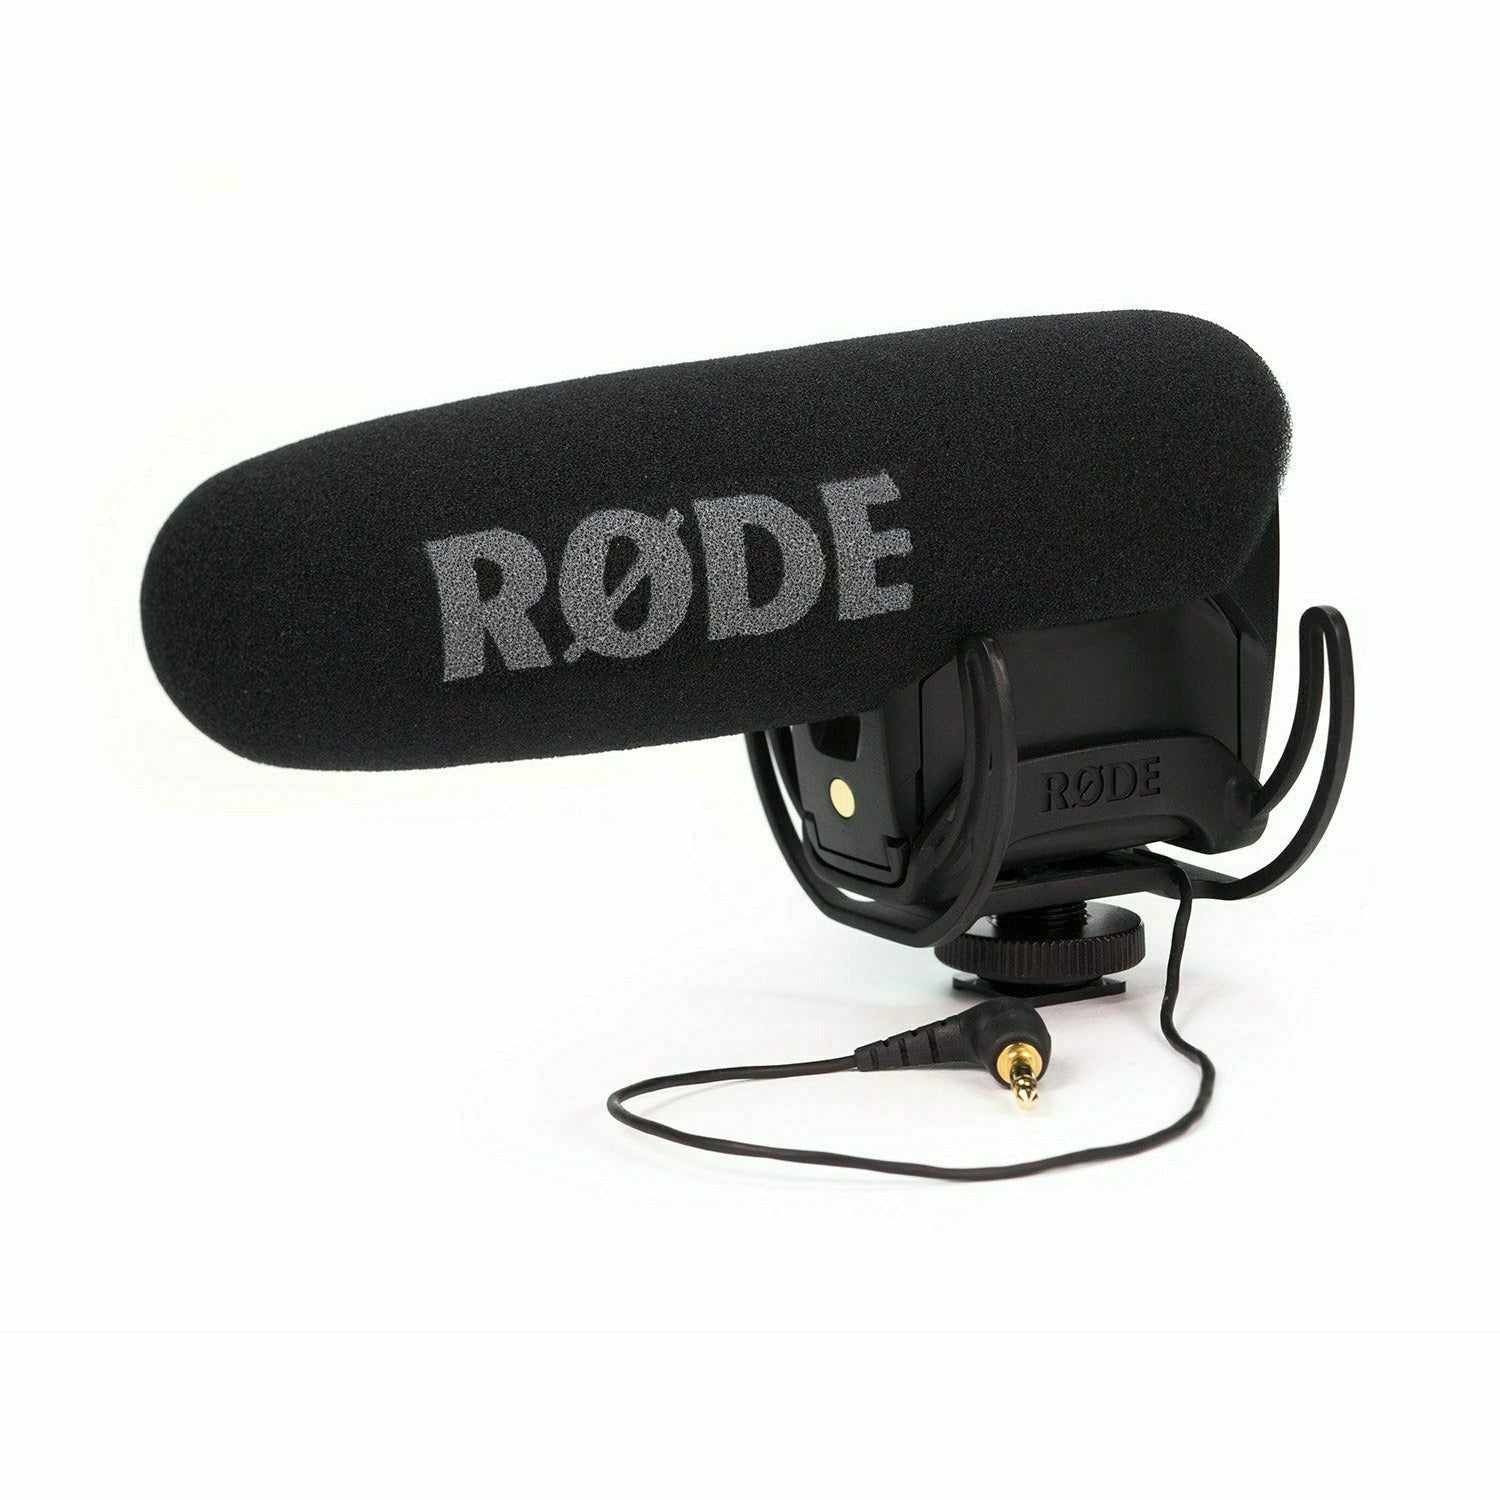 Hire Equipment - RODE VideoMic Pro Directional Super Cardioid Microphone - Weekend Hire - Dragon Image